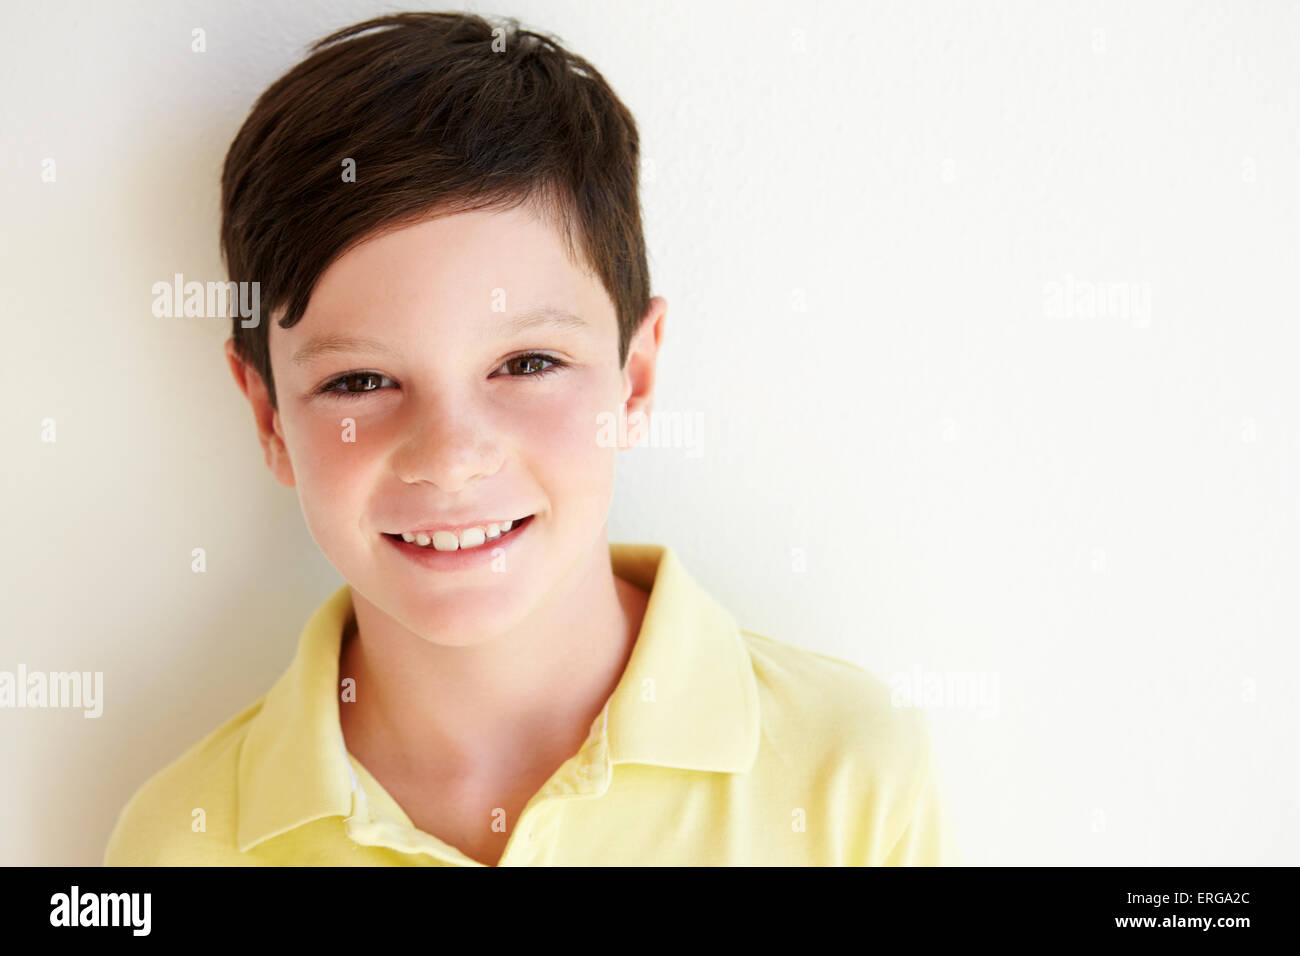 Smiling Young Boy Standing Outdoors Against White Wall Stock Photo